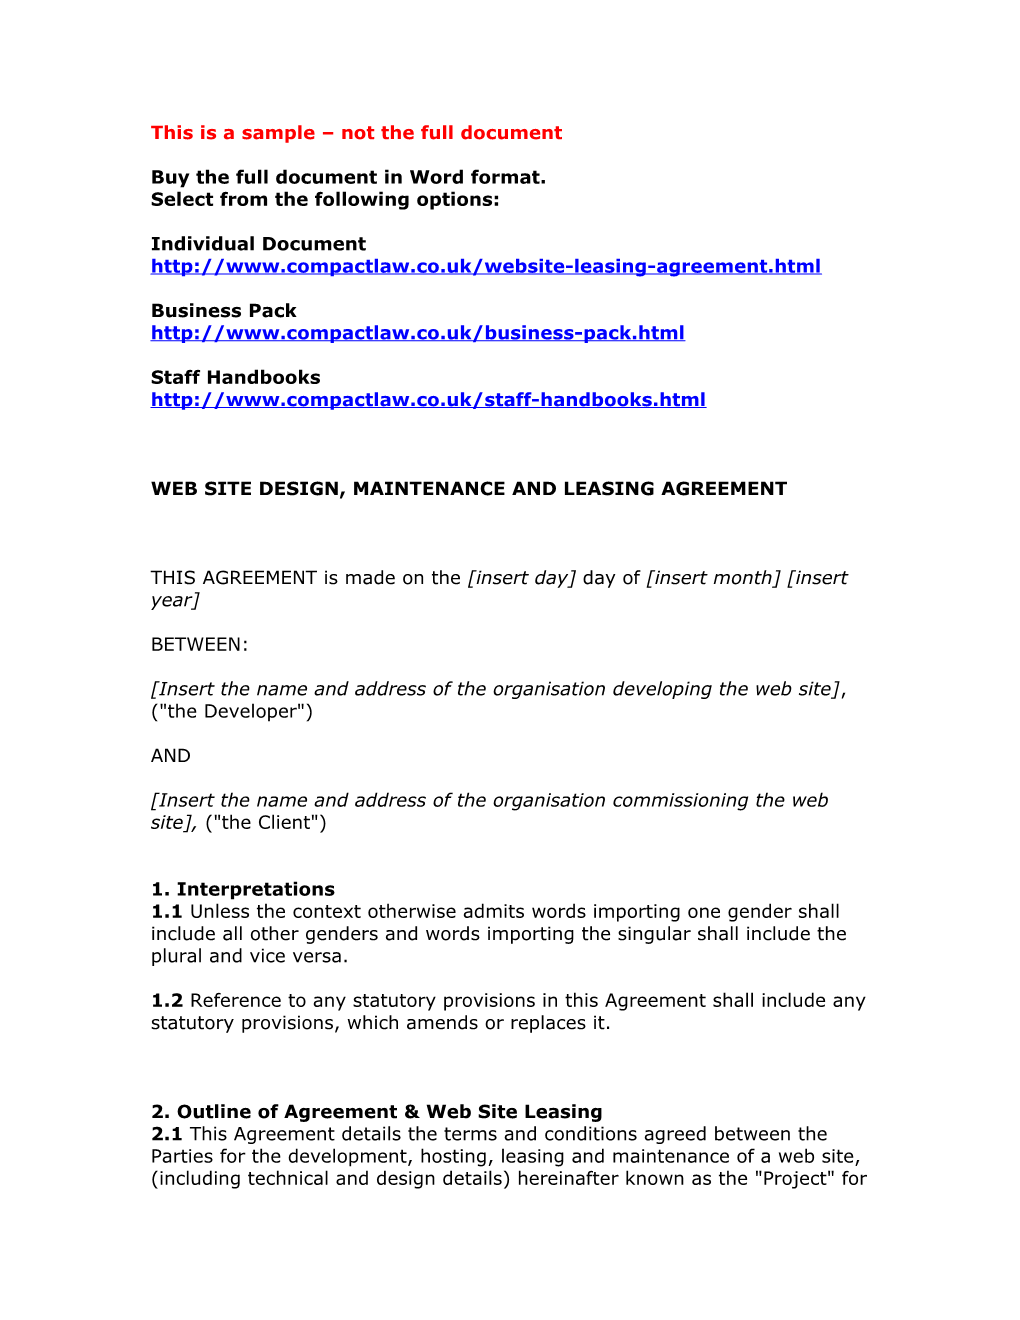 Web Site Design, Maintenance and Leasing Agreement